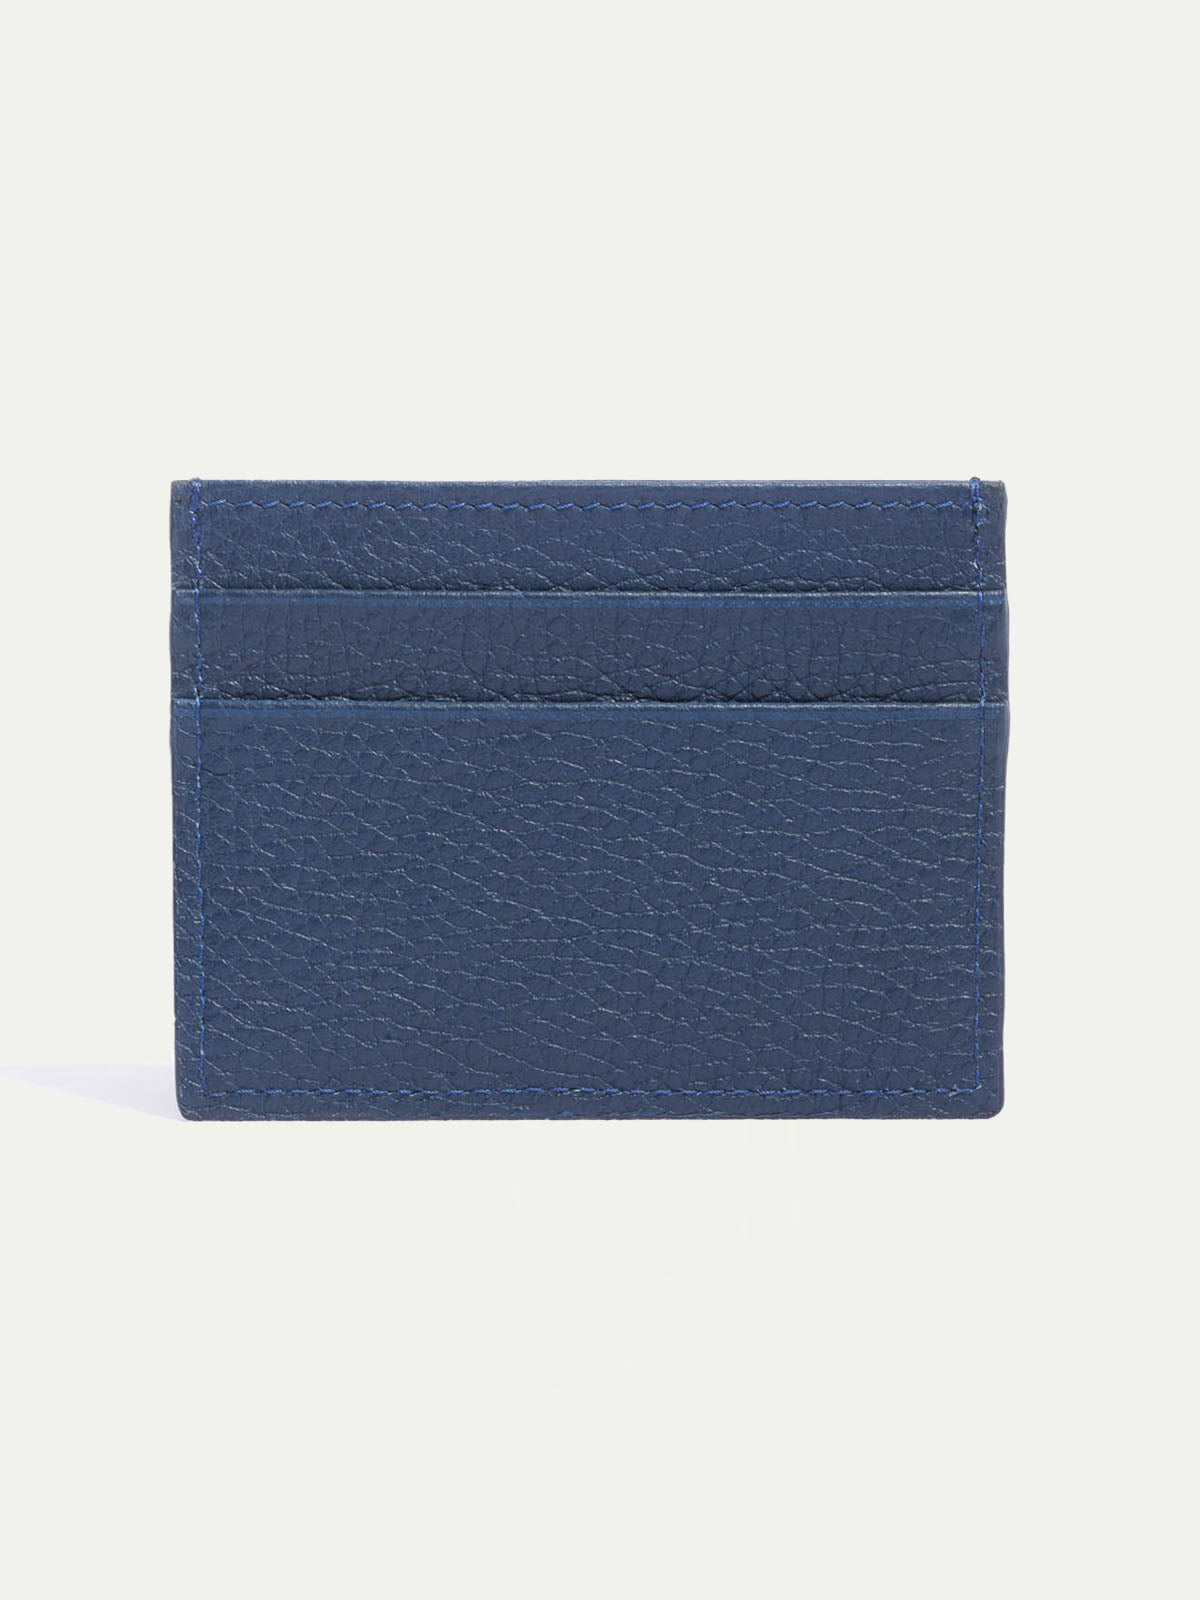 Blue leather card holder - Made in Italy